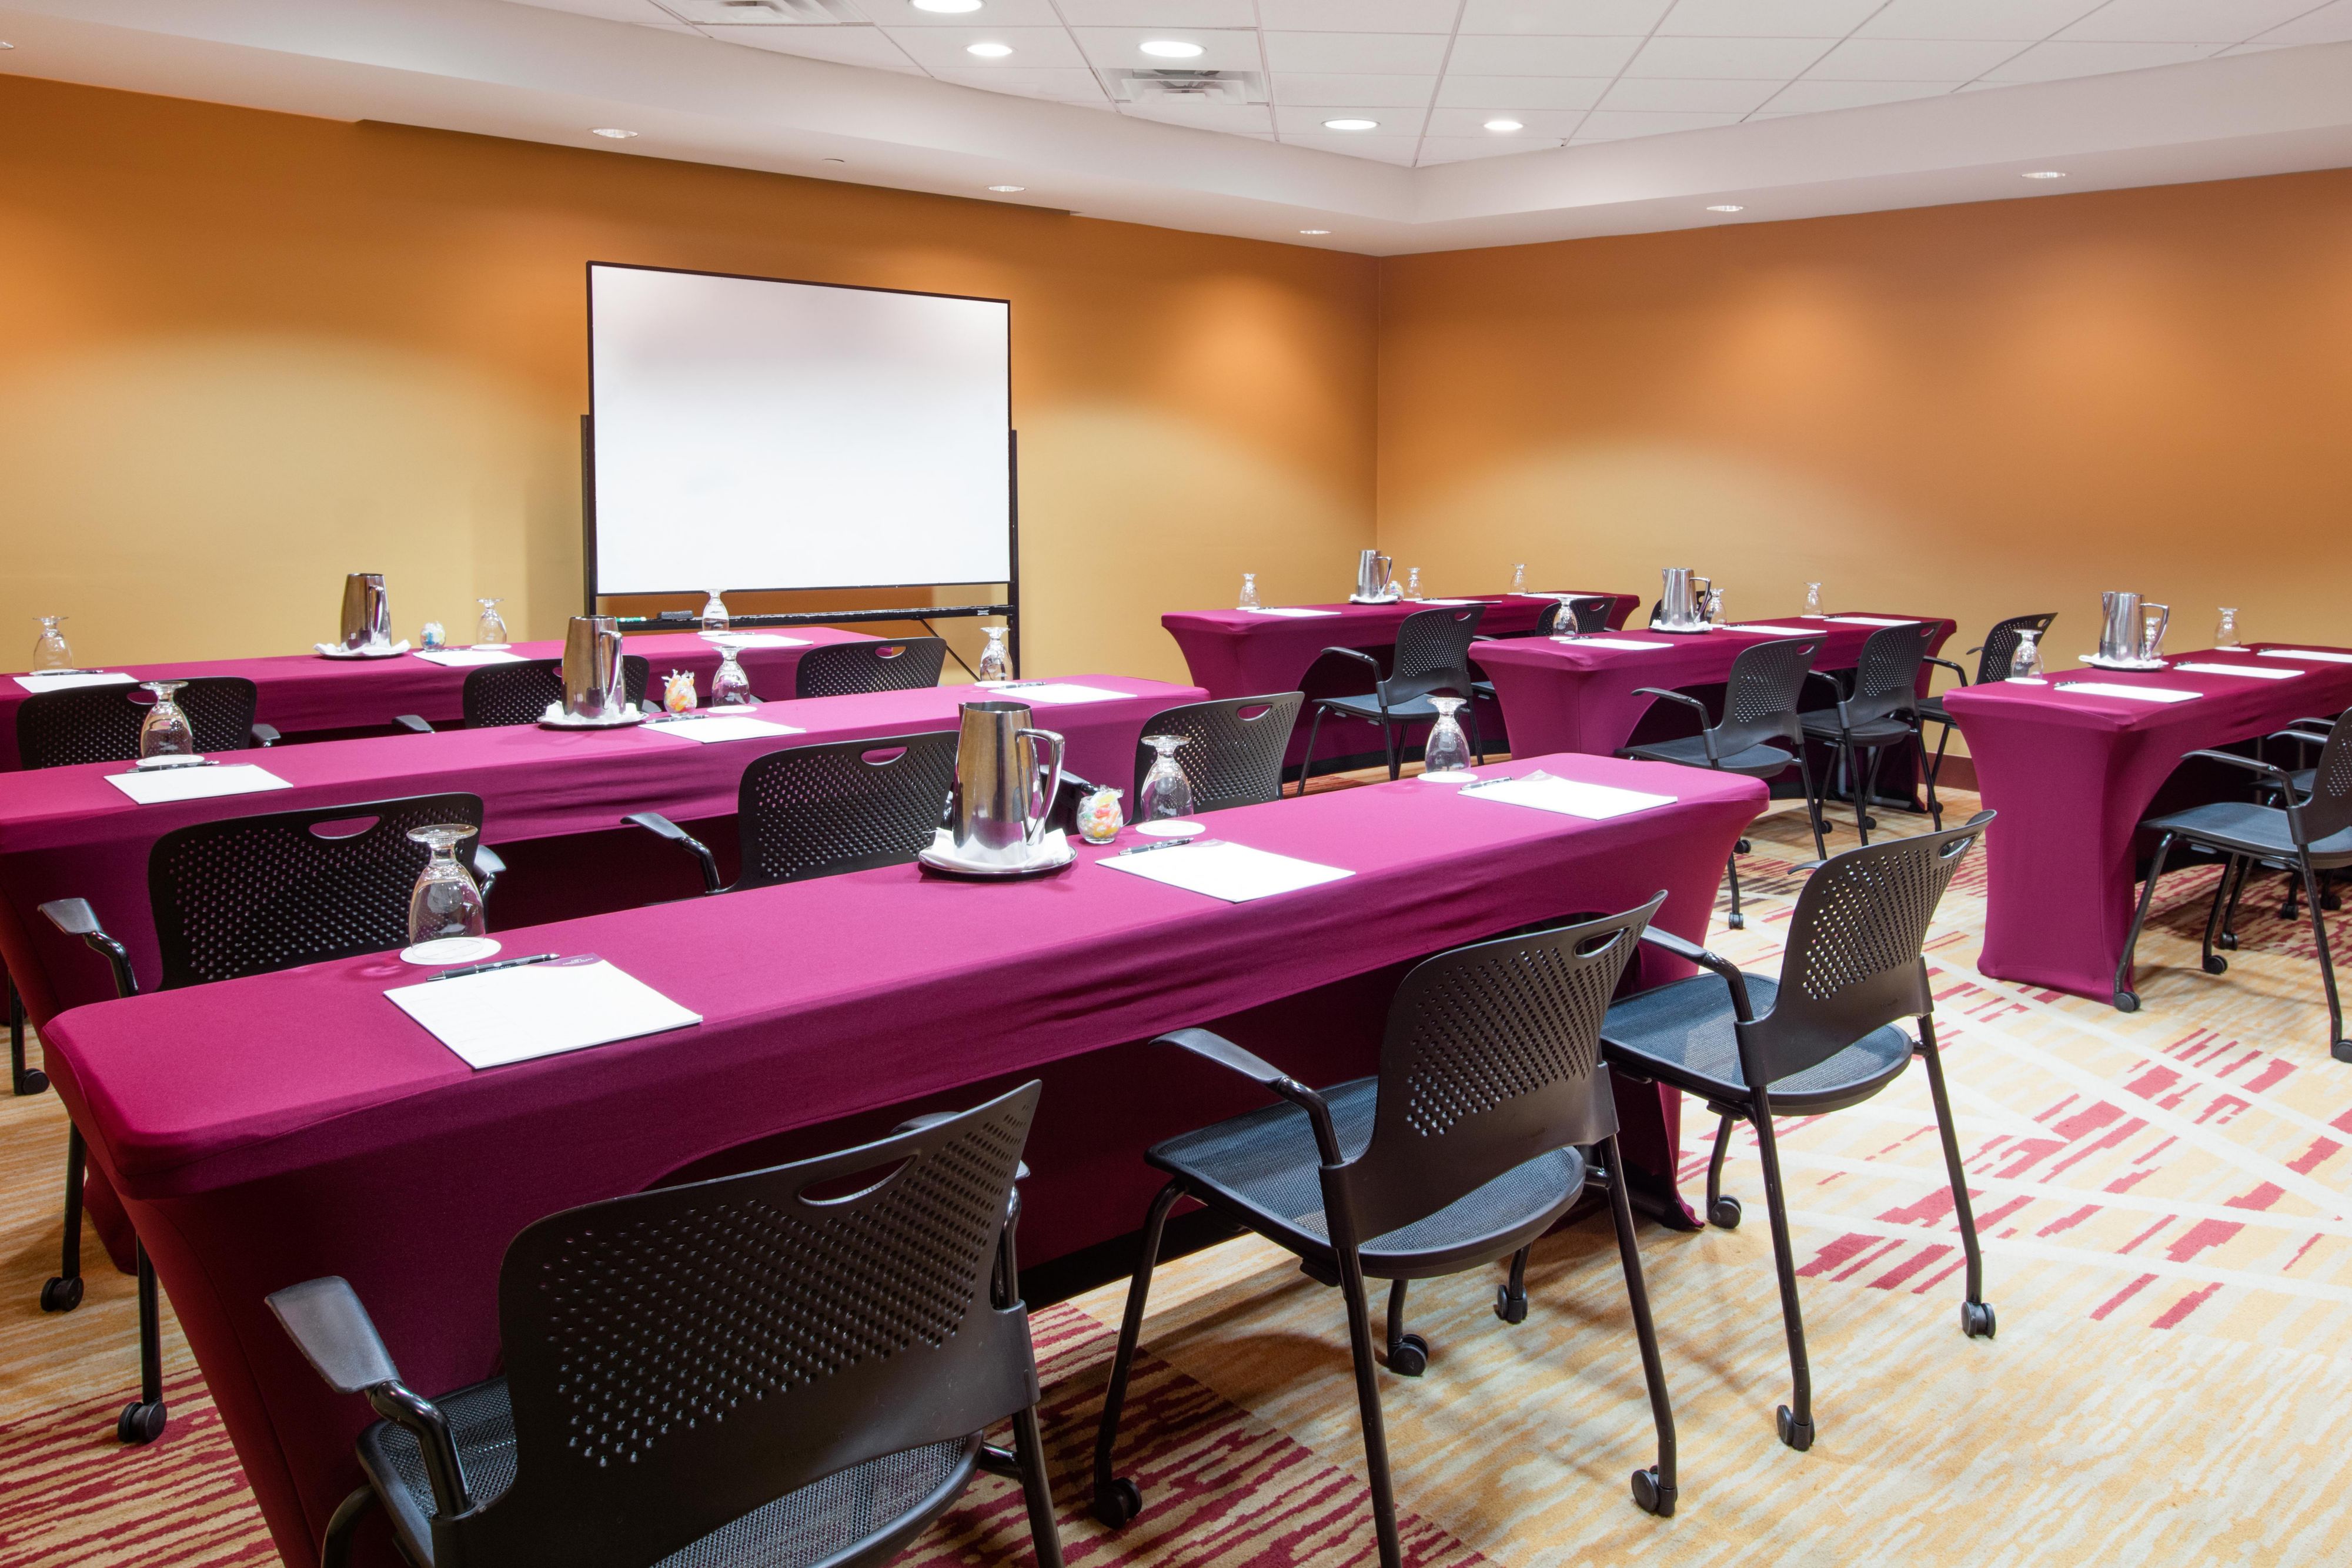 The Manchester Room is great for medium-sized groups and meetings.